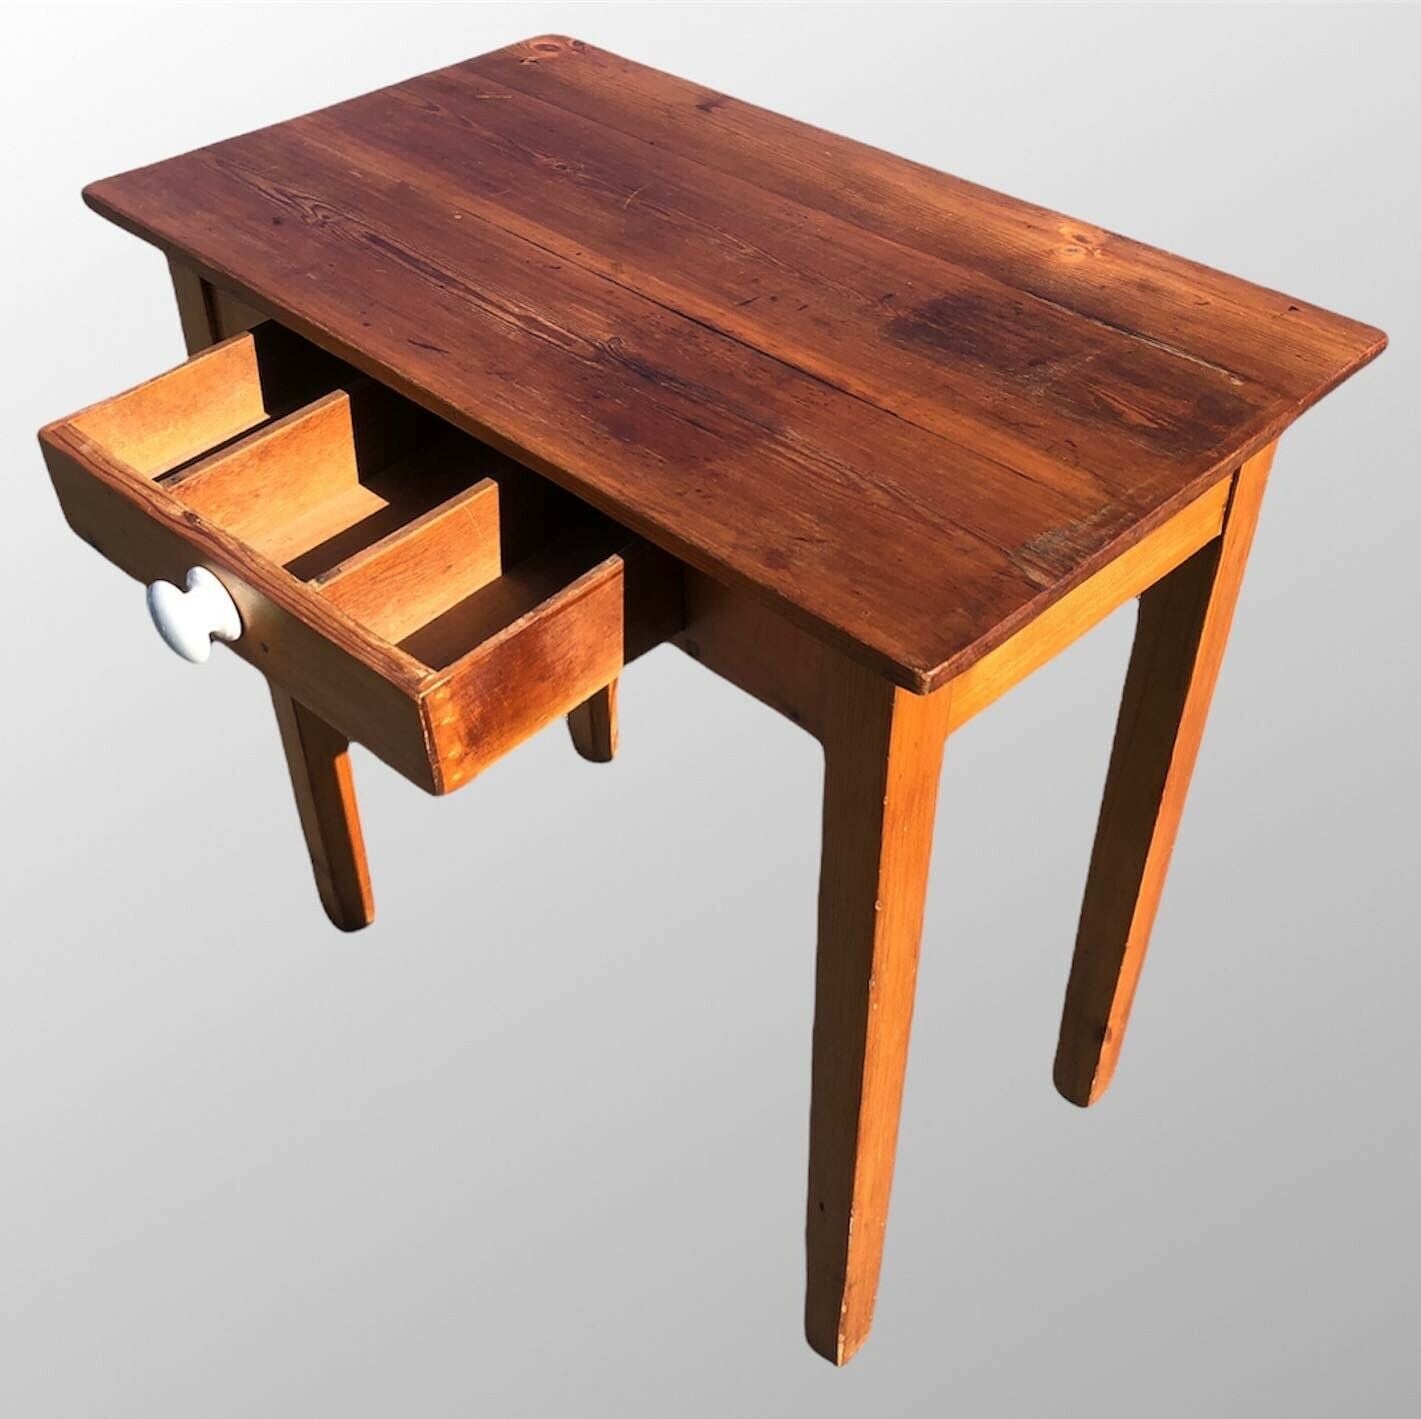 Vintage Pine Table With Drawer ( SOLD )